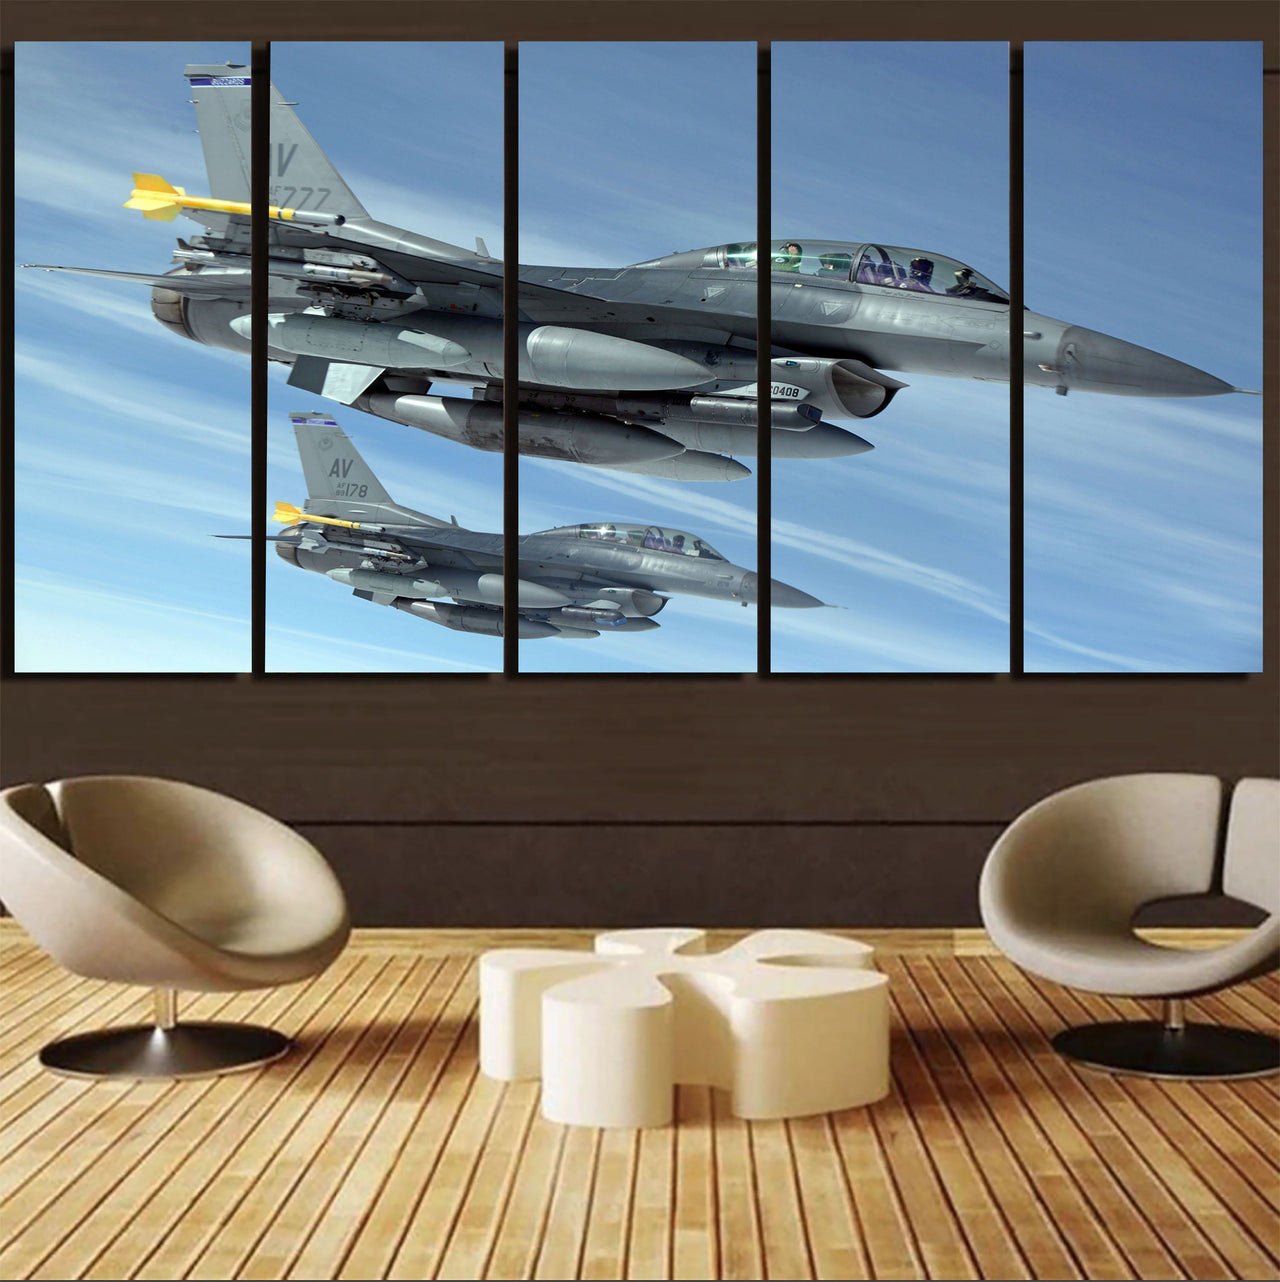 Two Fighting Falcon Printed Canvas Prints (5 Pieces) Aviation Shop 